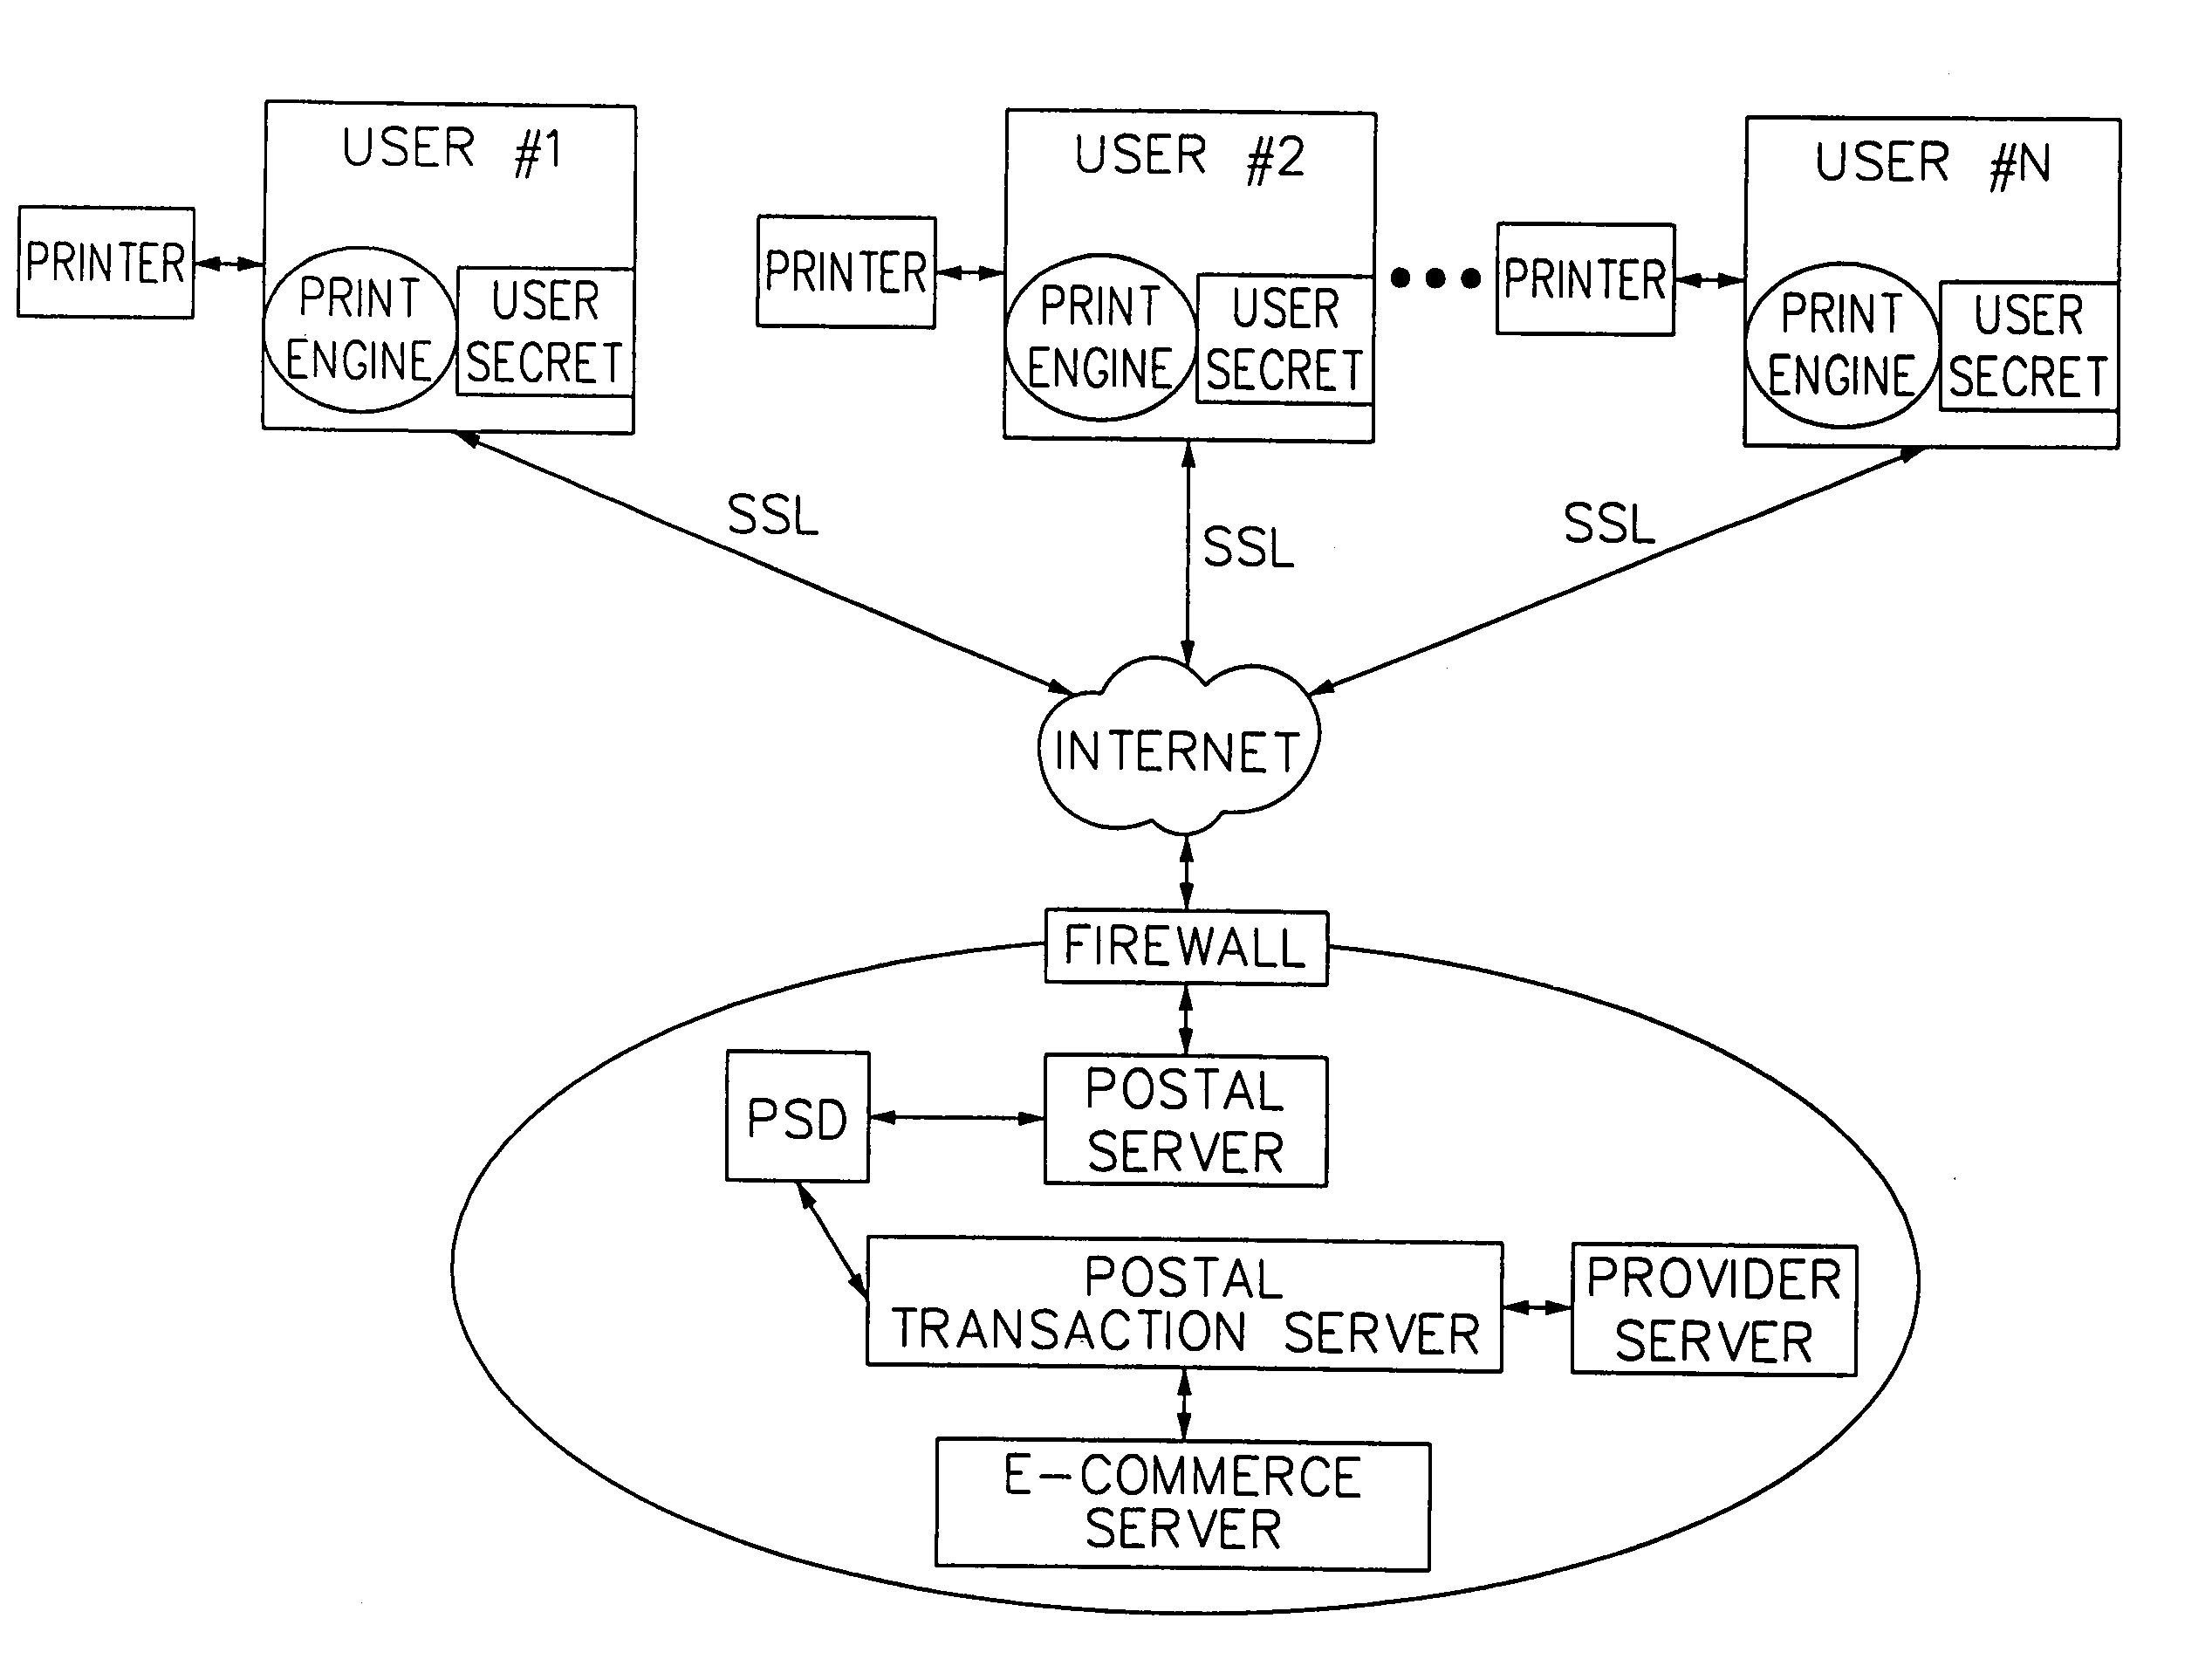 Role assignments in a cryptographic module for secure processing of value-bearing items